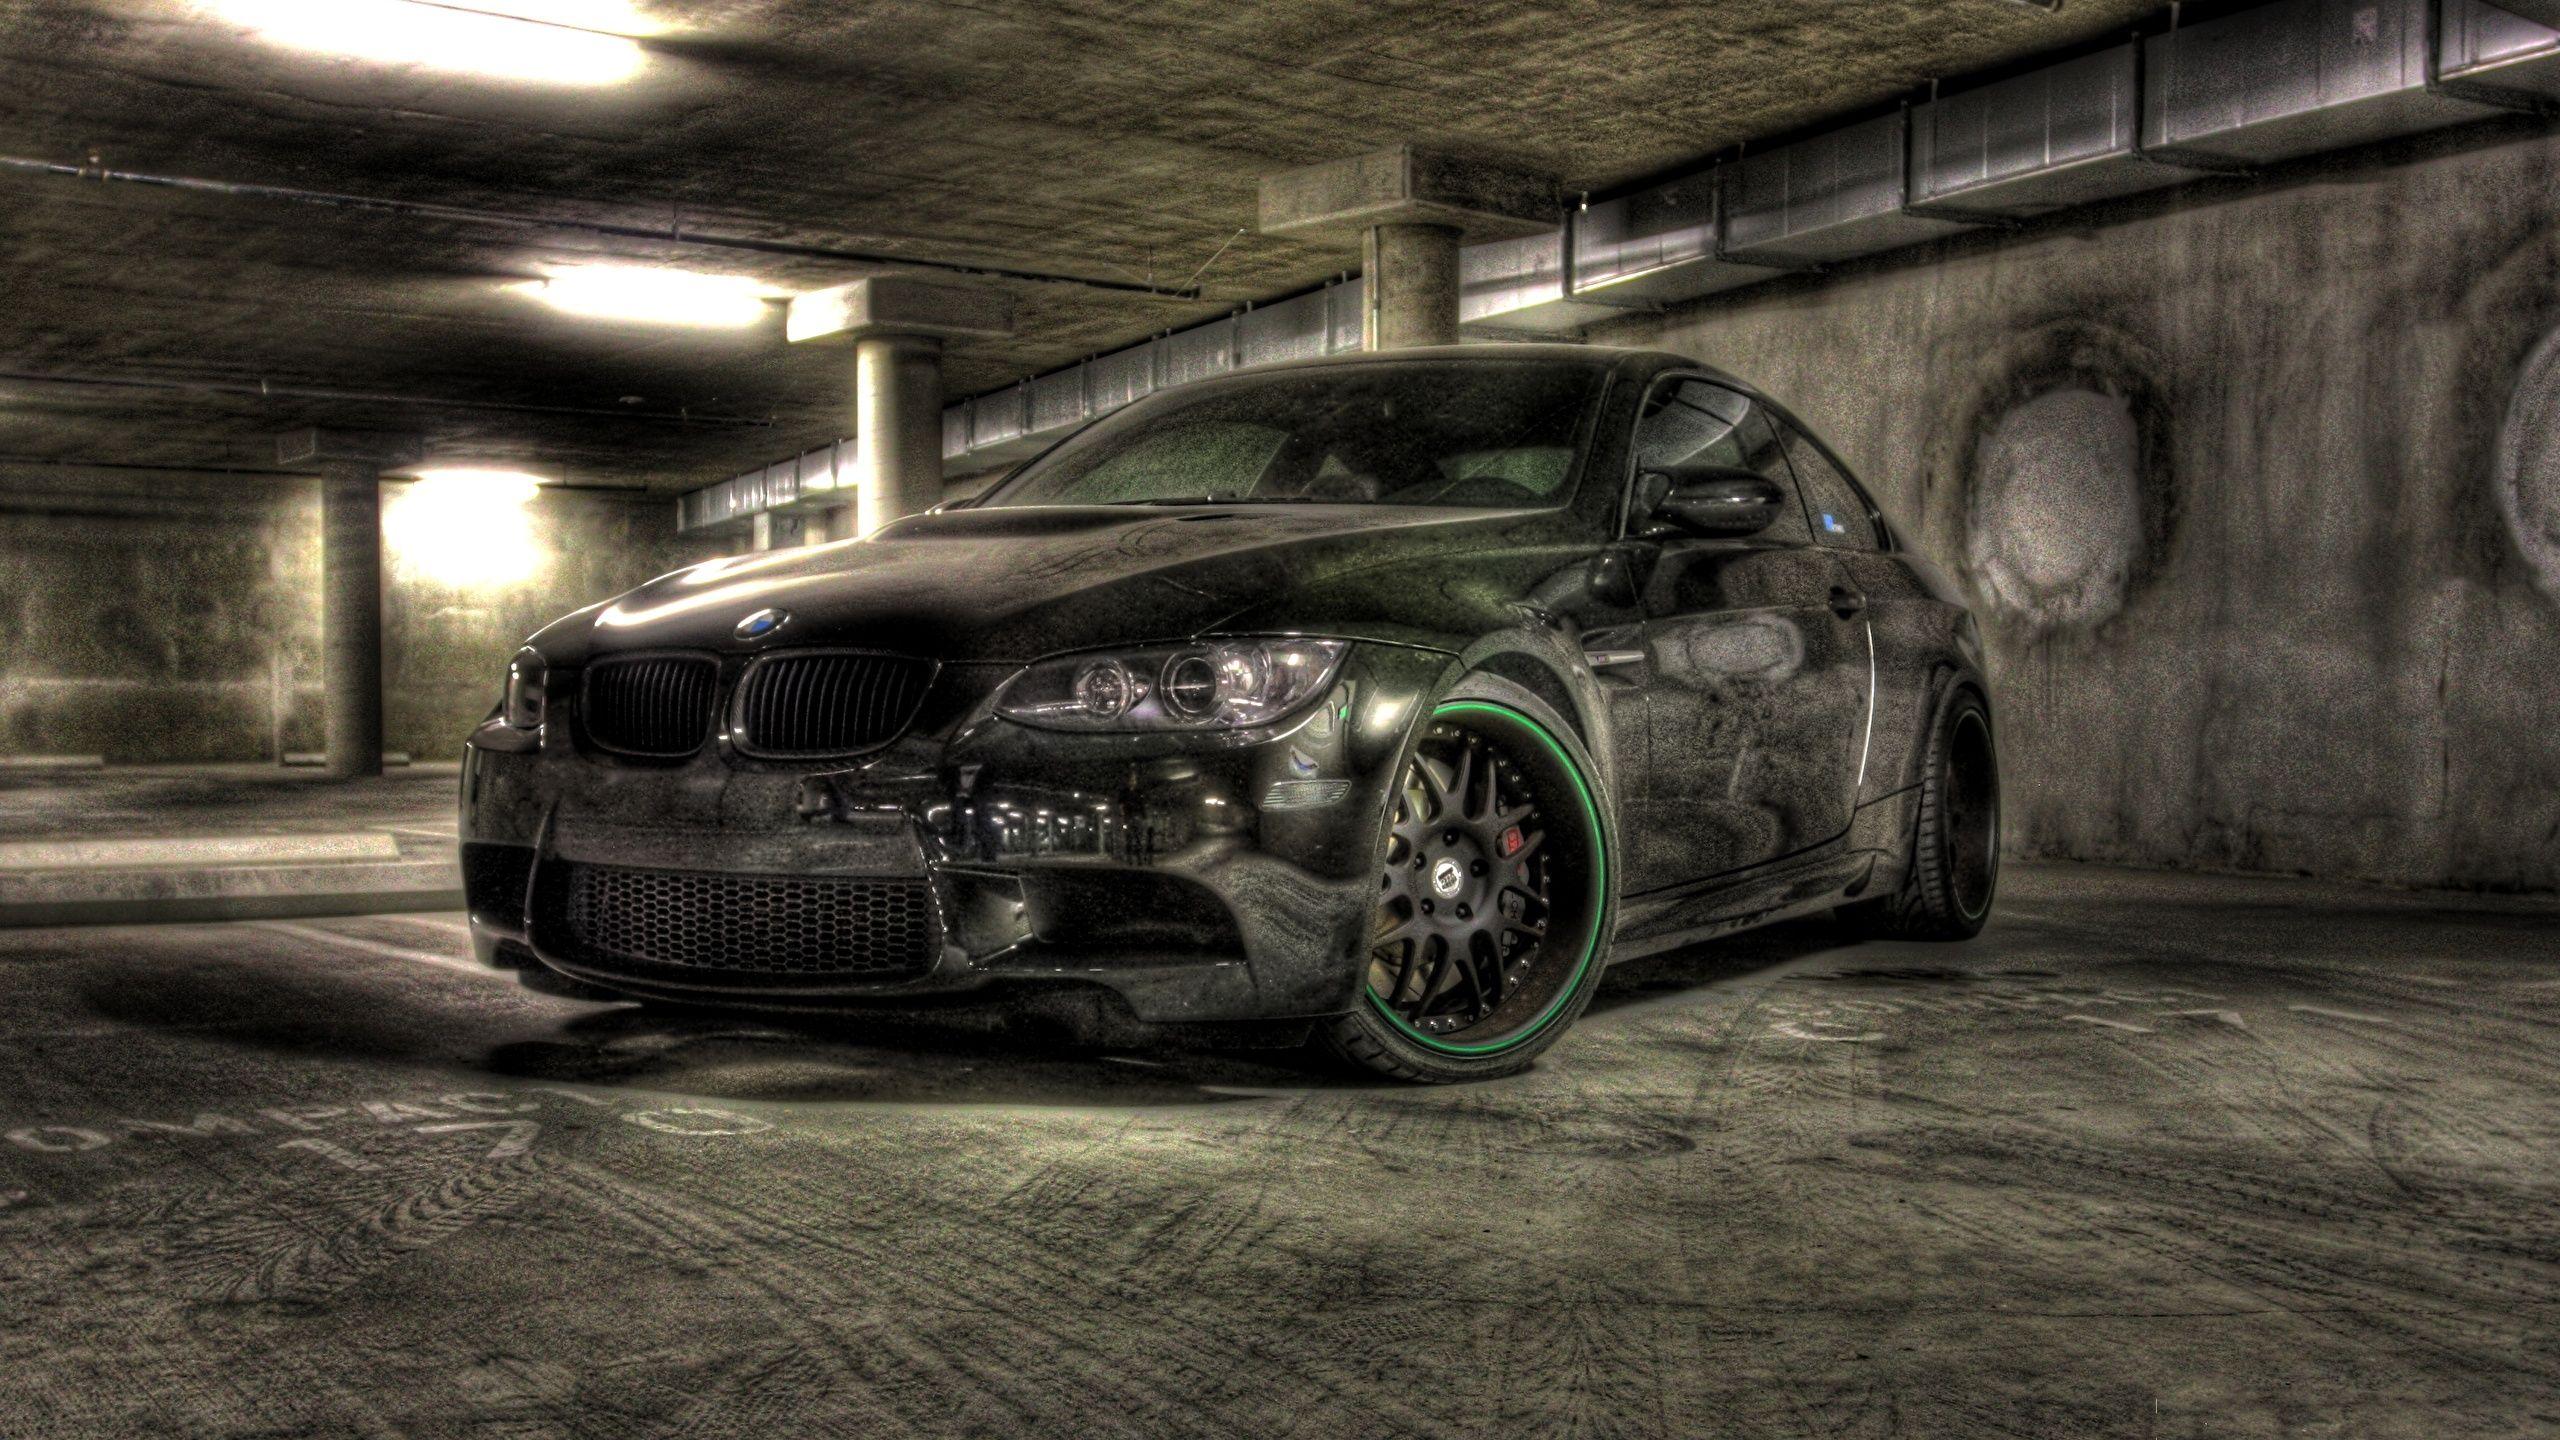 Wallpaper BMW Tuning m3 e92 HDR Cars Front 2560x1440